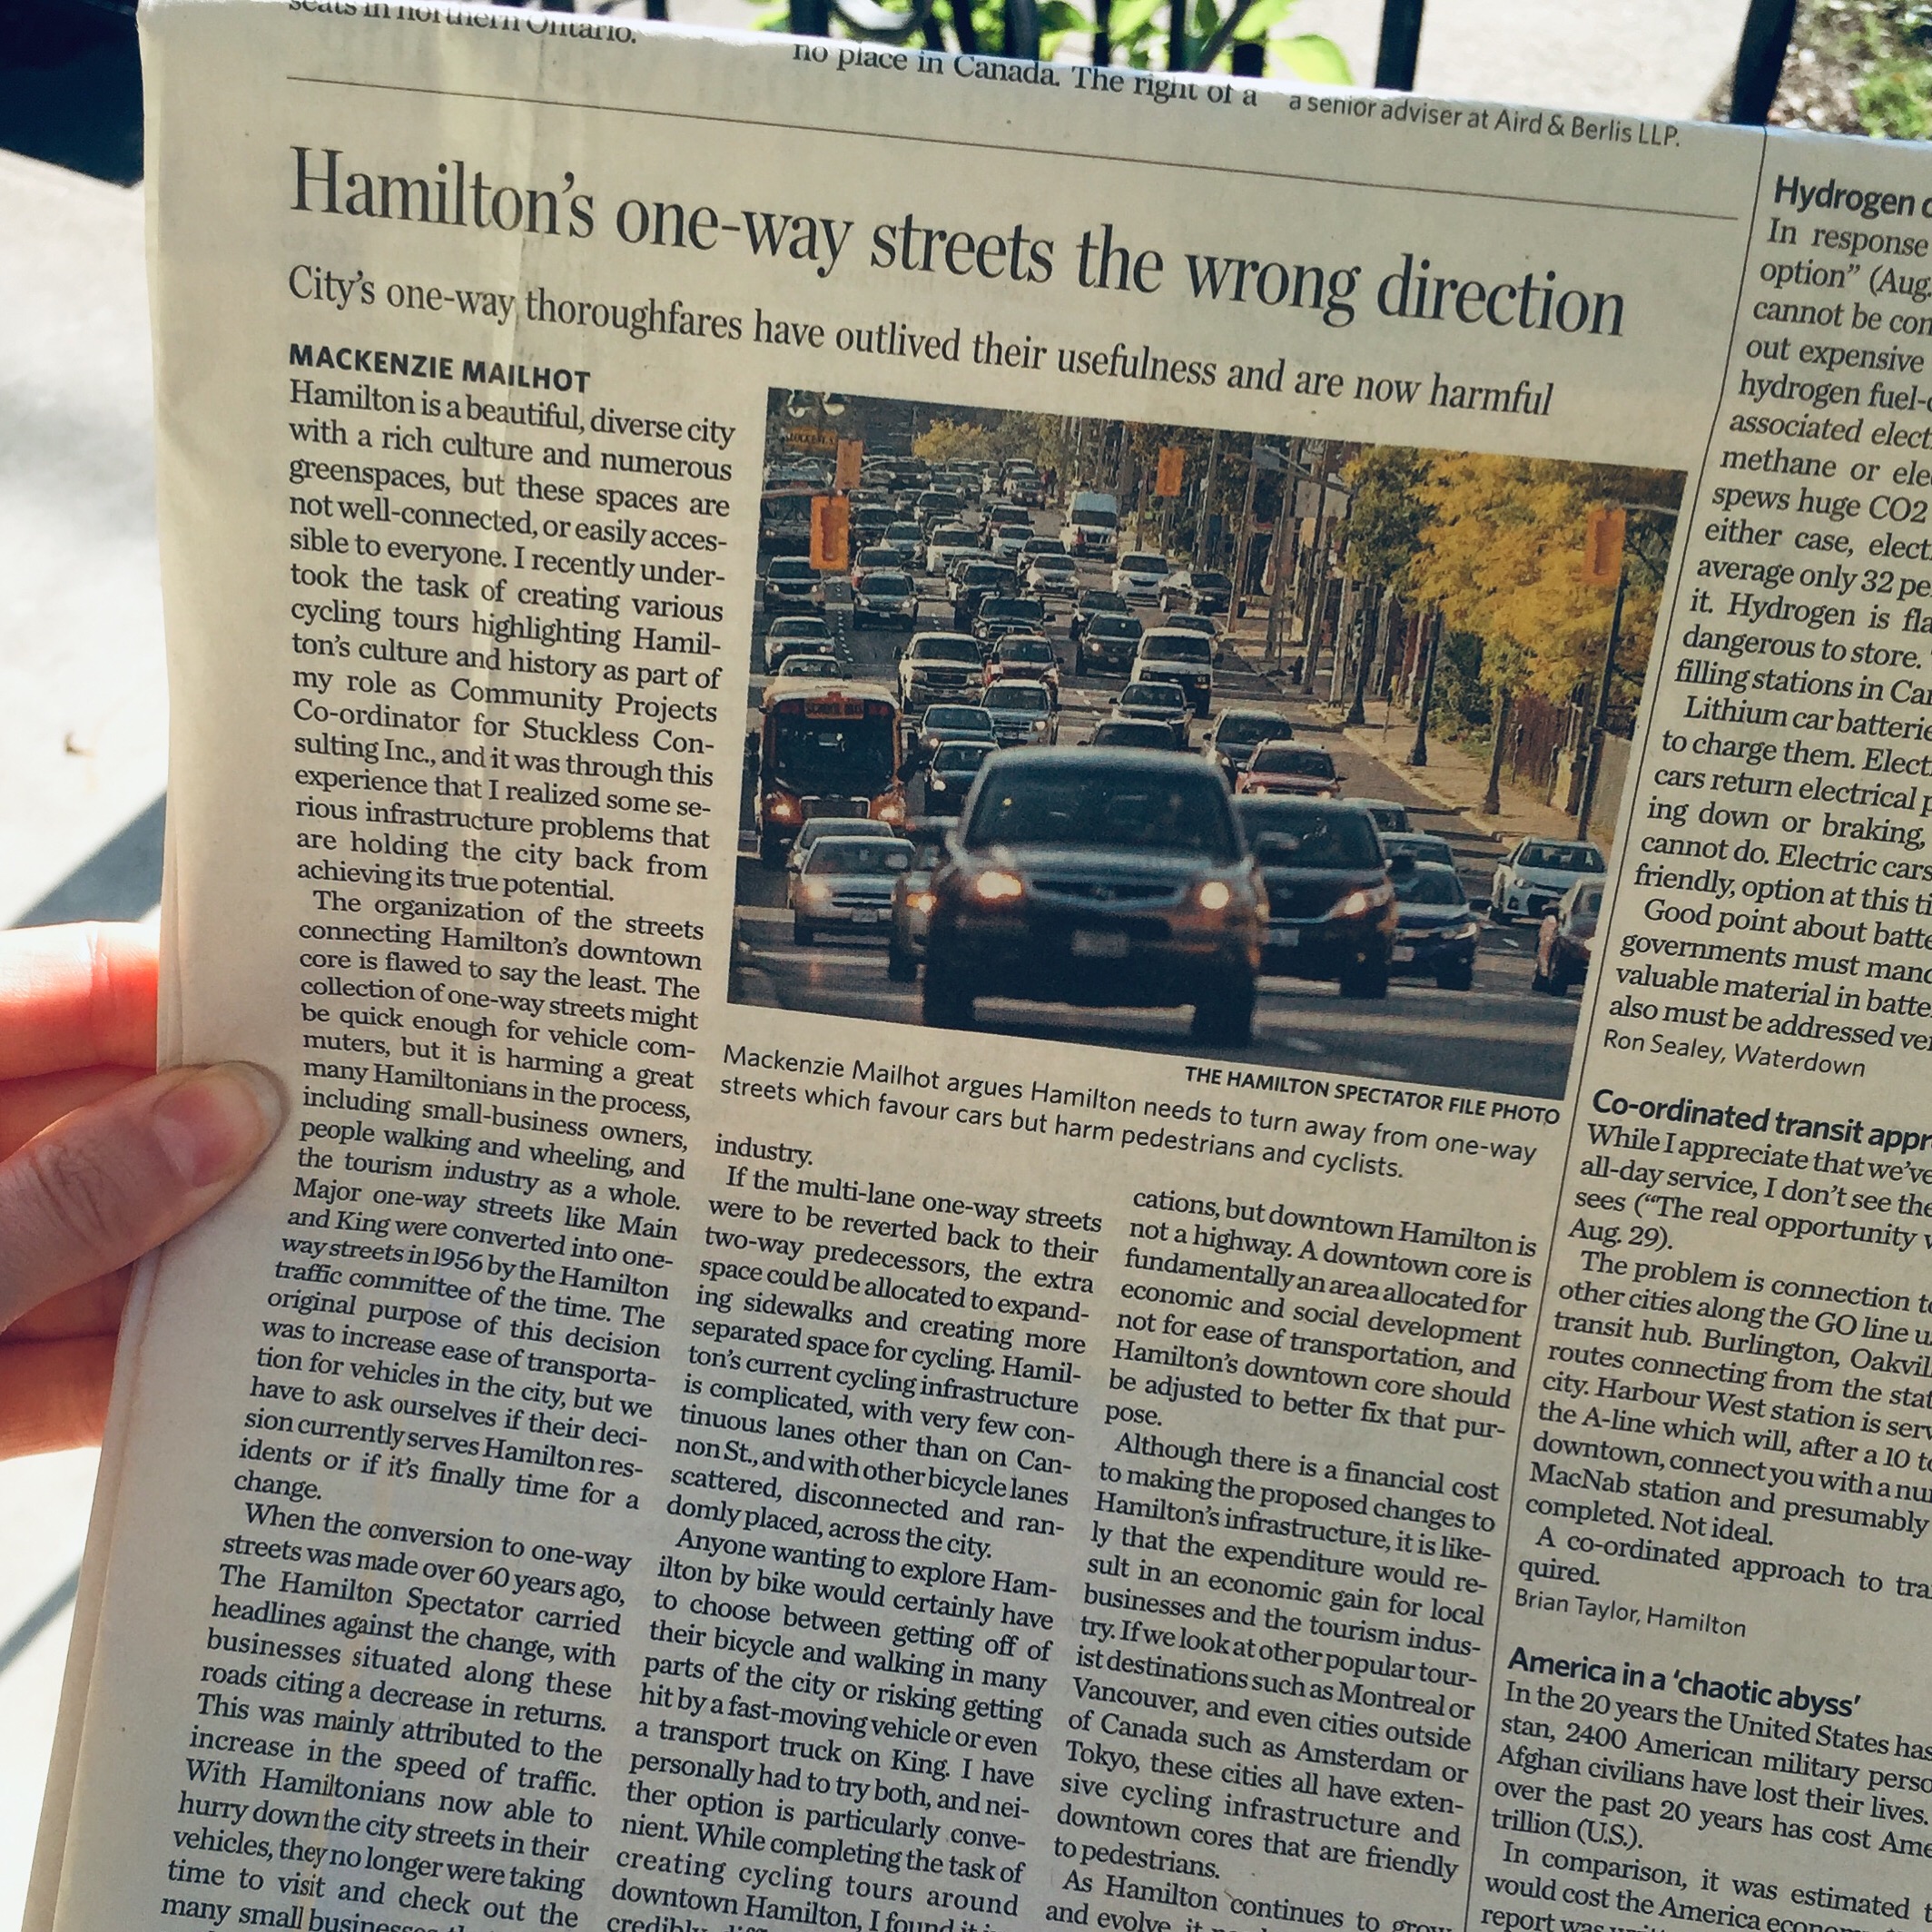 Photo of a newspaper OpEd with the title "Hamilton's one-way streets the wrong direction"